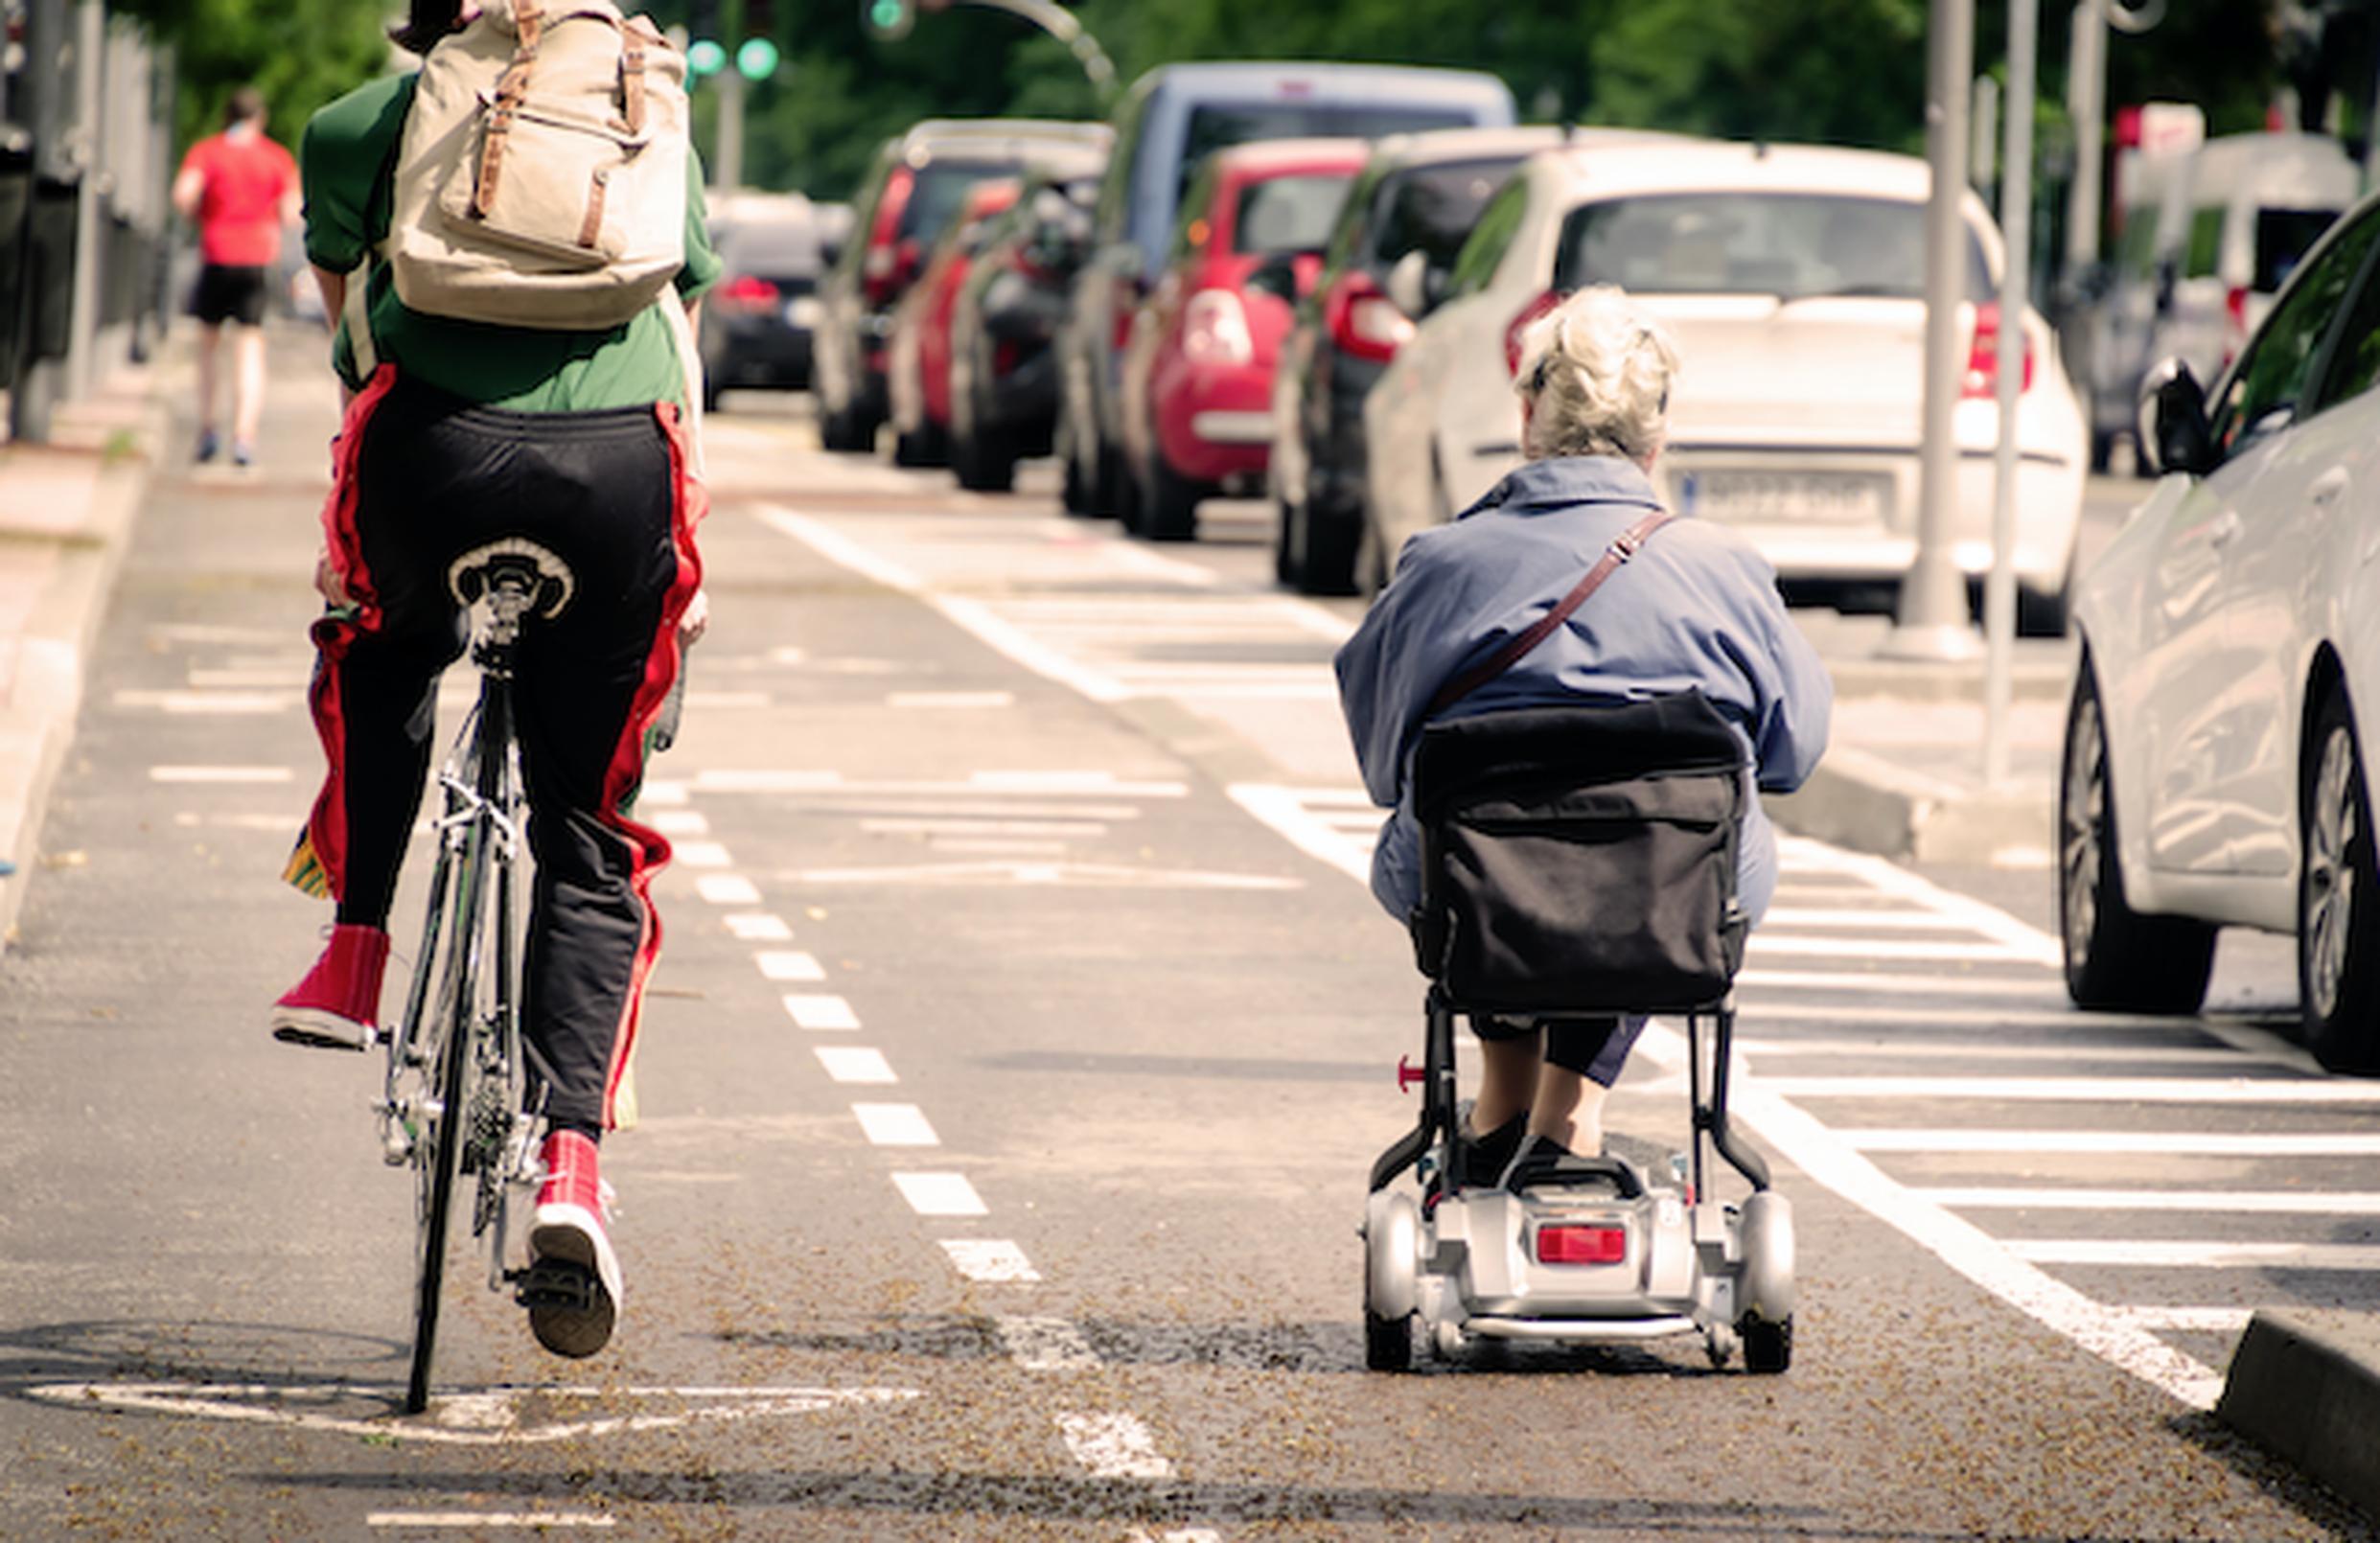 Cyclists, drivers and other road users will need to look out for, and after, one another